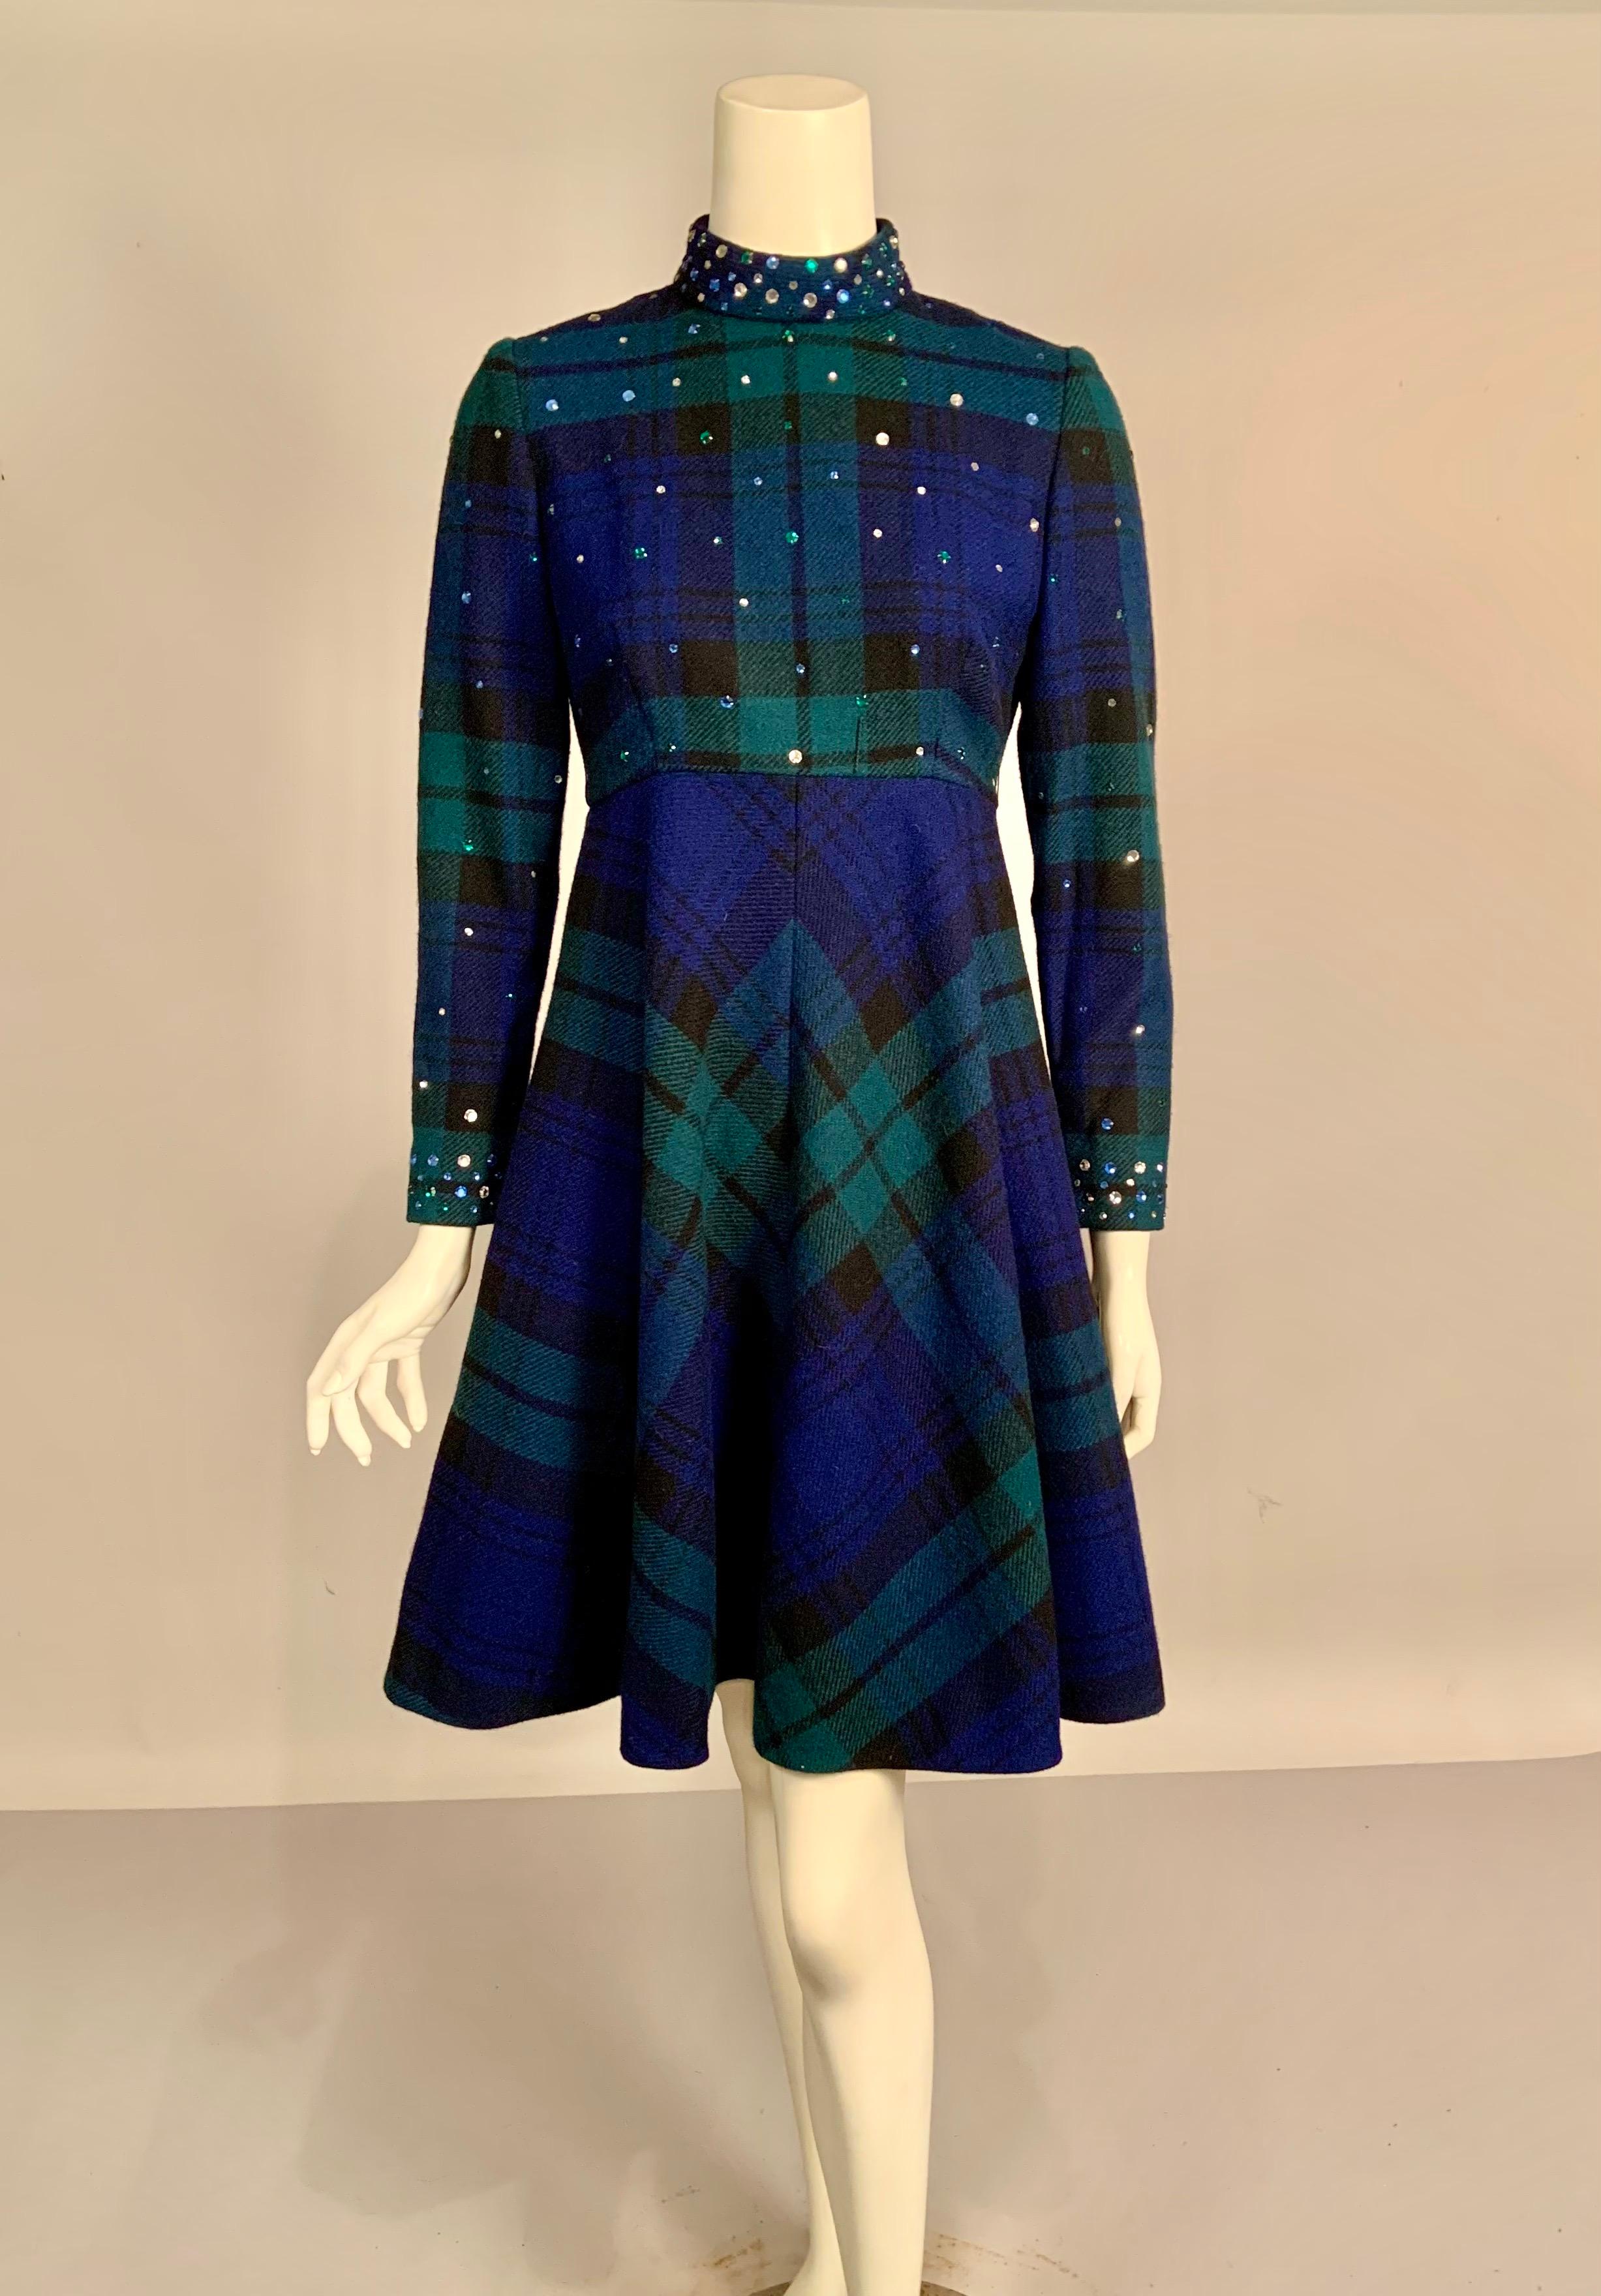 This dress designed by Pauline Trigere is another variation on the rhinestone studded dresses and coats that she is known for creating.  It is a soft wool in a classic Black Watch Tartan plaid.  The top of the dress is studded with prong set